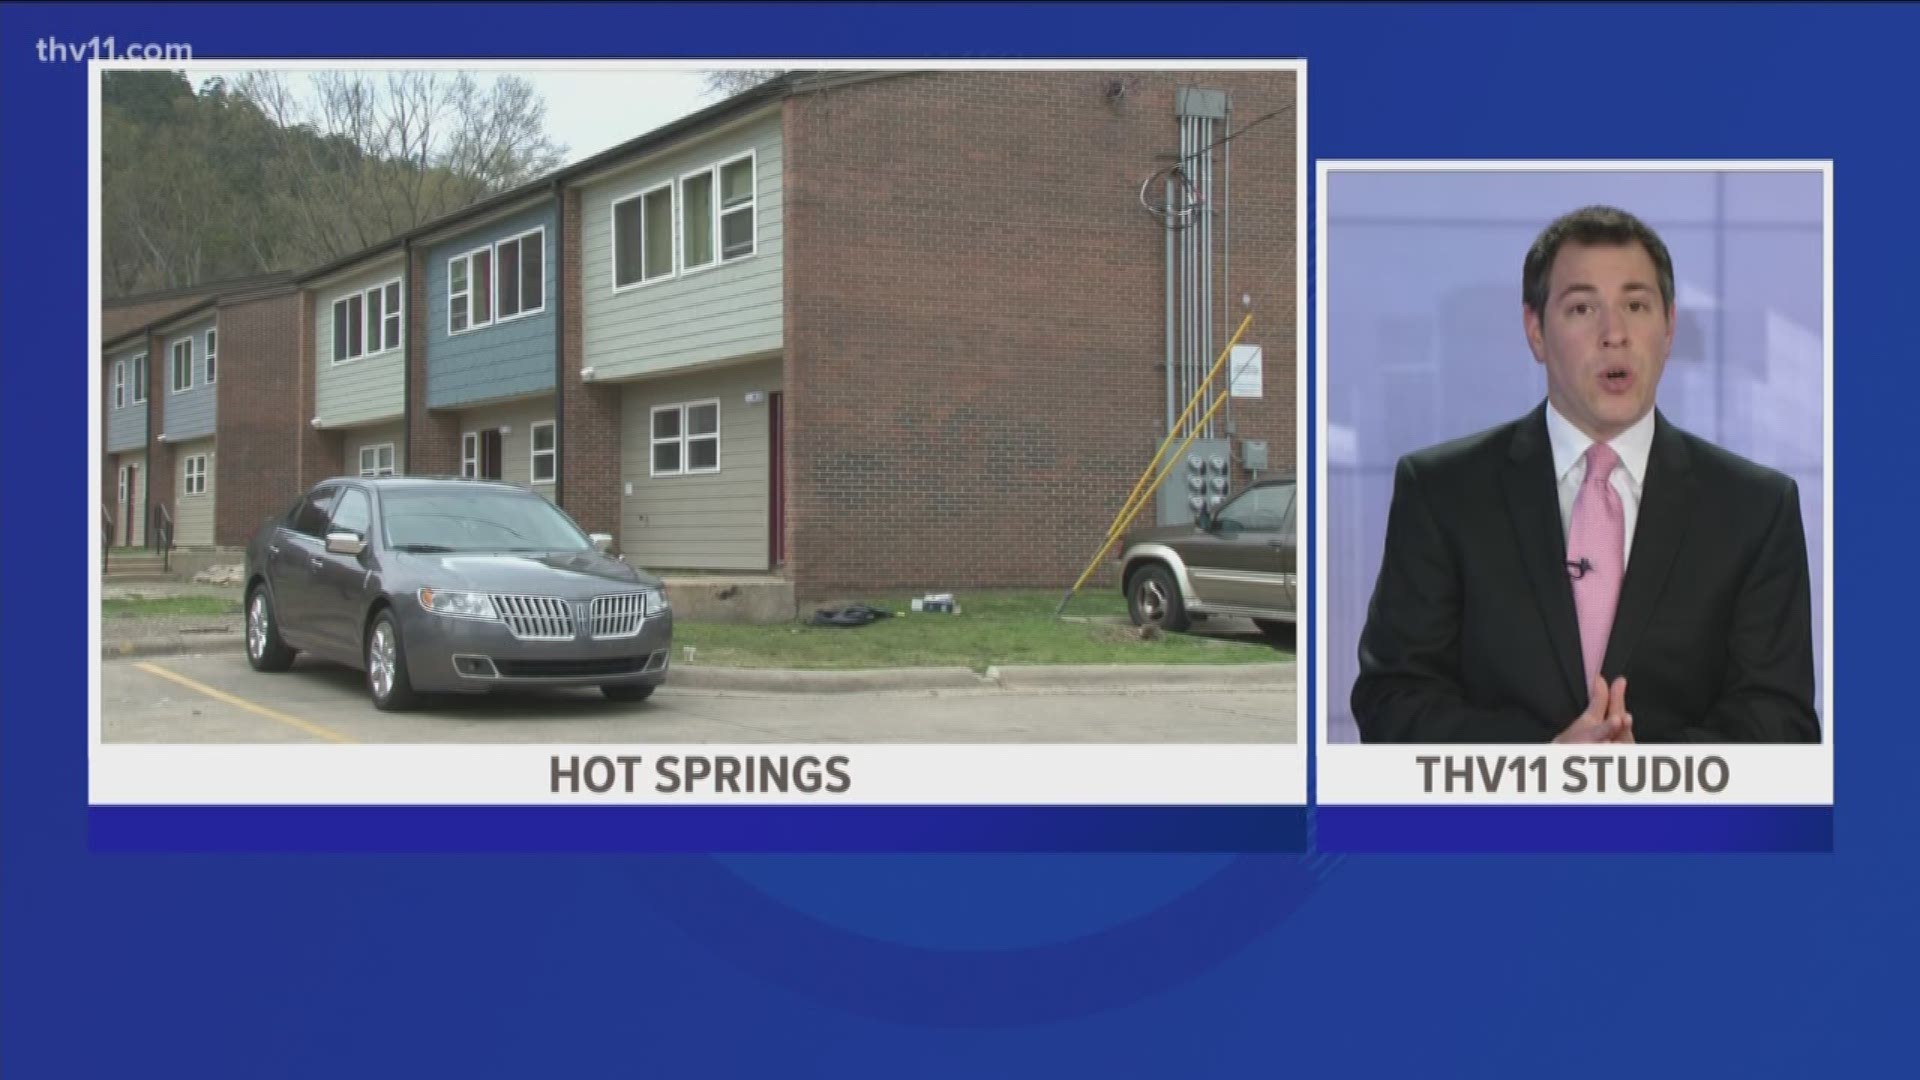 Another person is dead after a shooting at an apartment complex in Hot Springs.